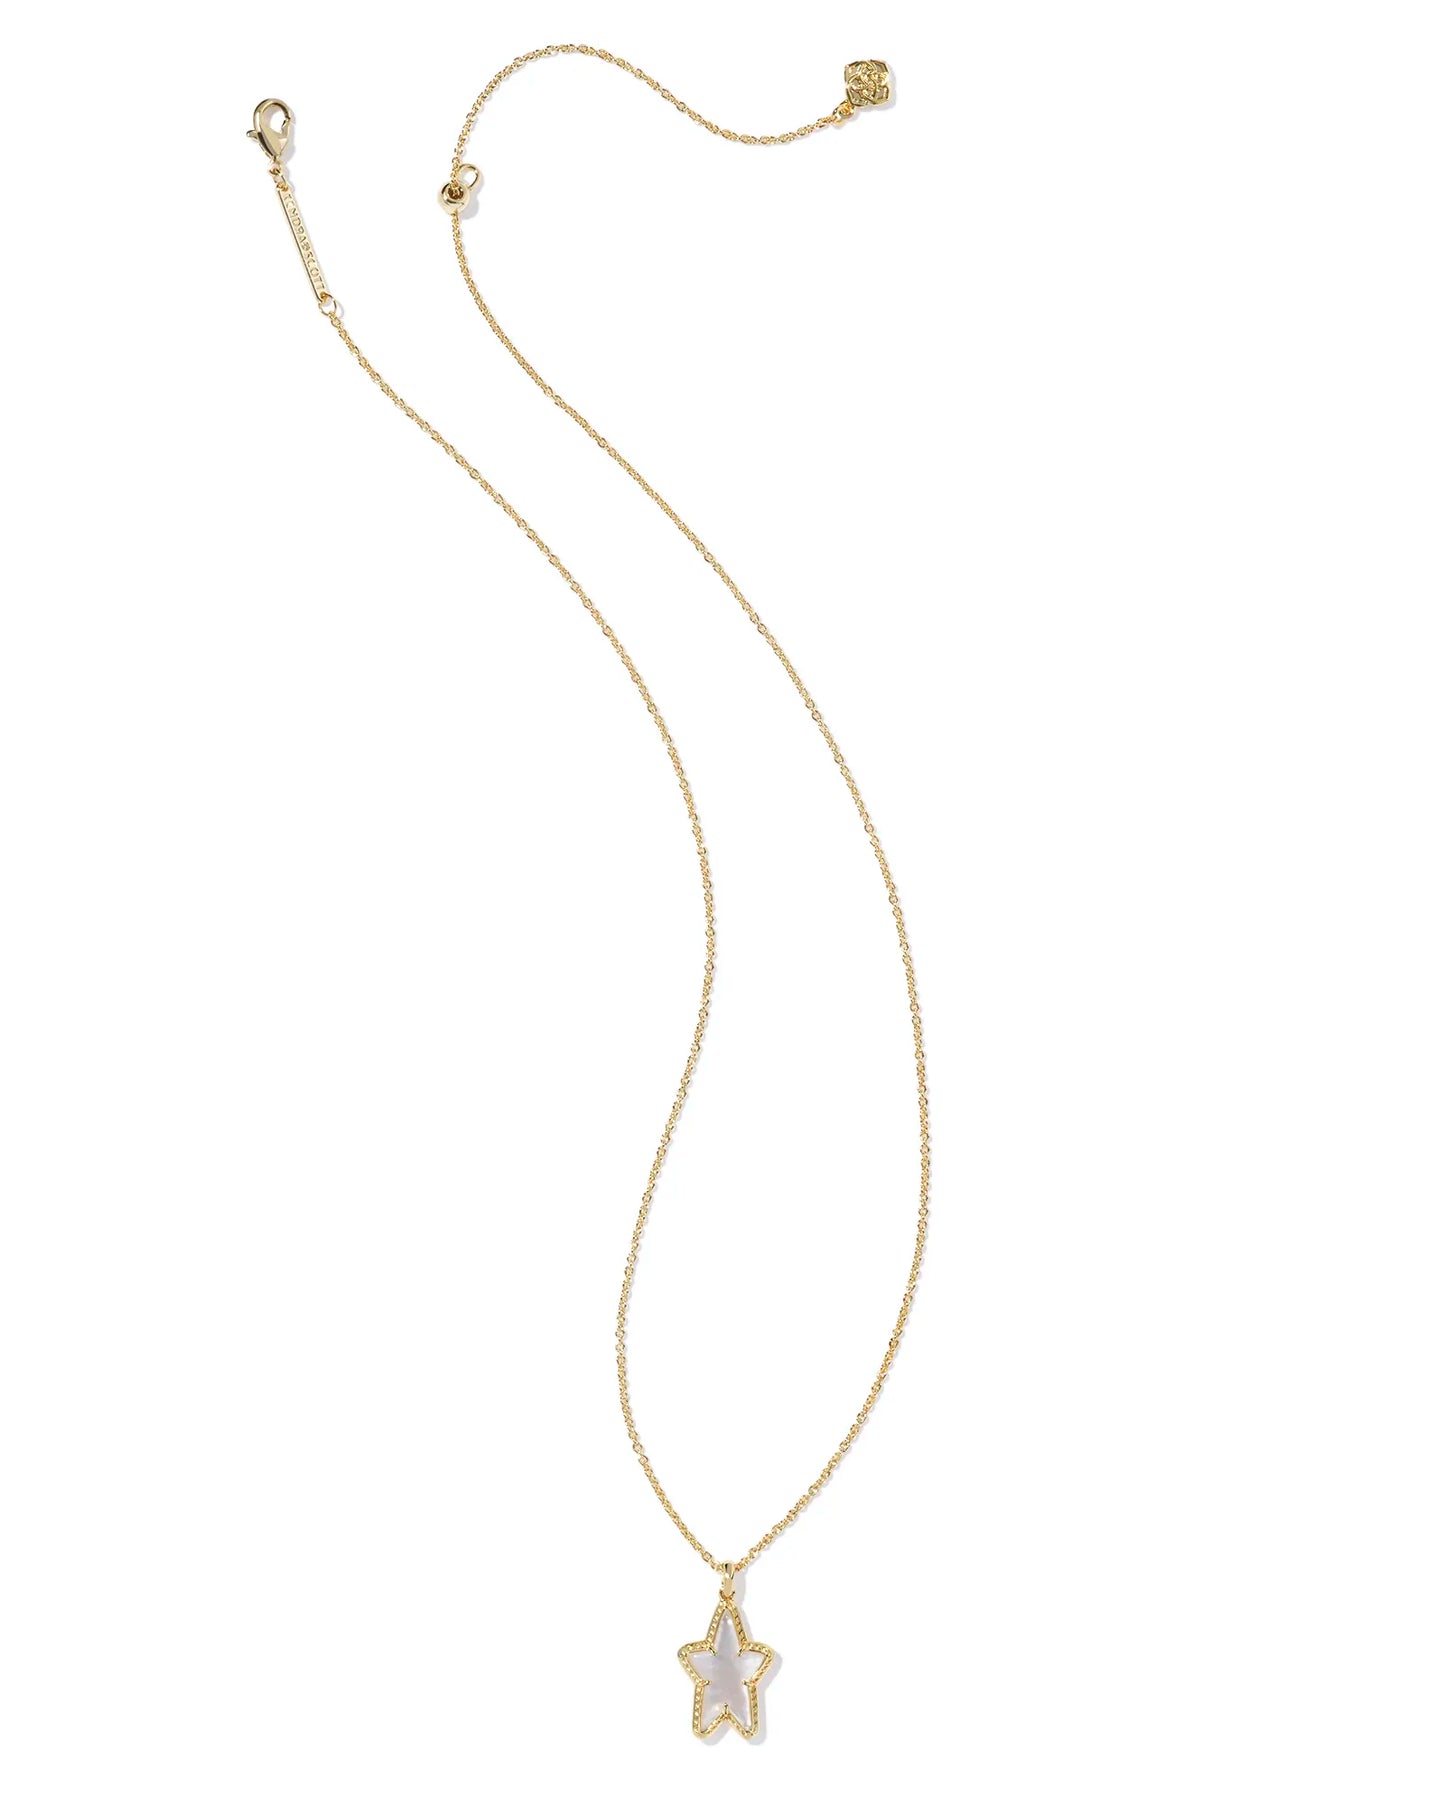 Kendra Scott Ada Star Short Pendant Necklace Gold Ivory Mother of Pearl-Necklaces-Kendra Scott-FD 05/20/24, N00596GLD-The Twisted Chandelier